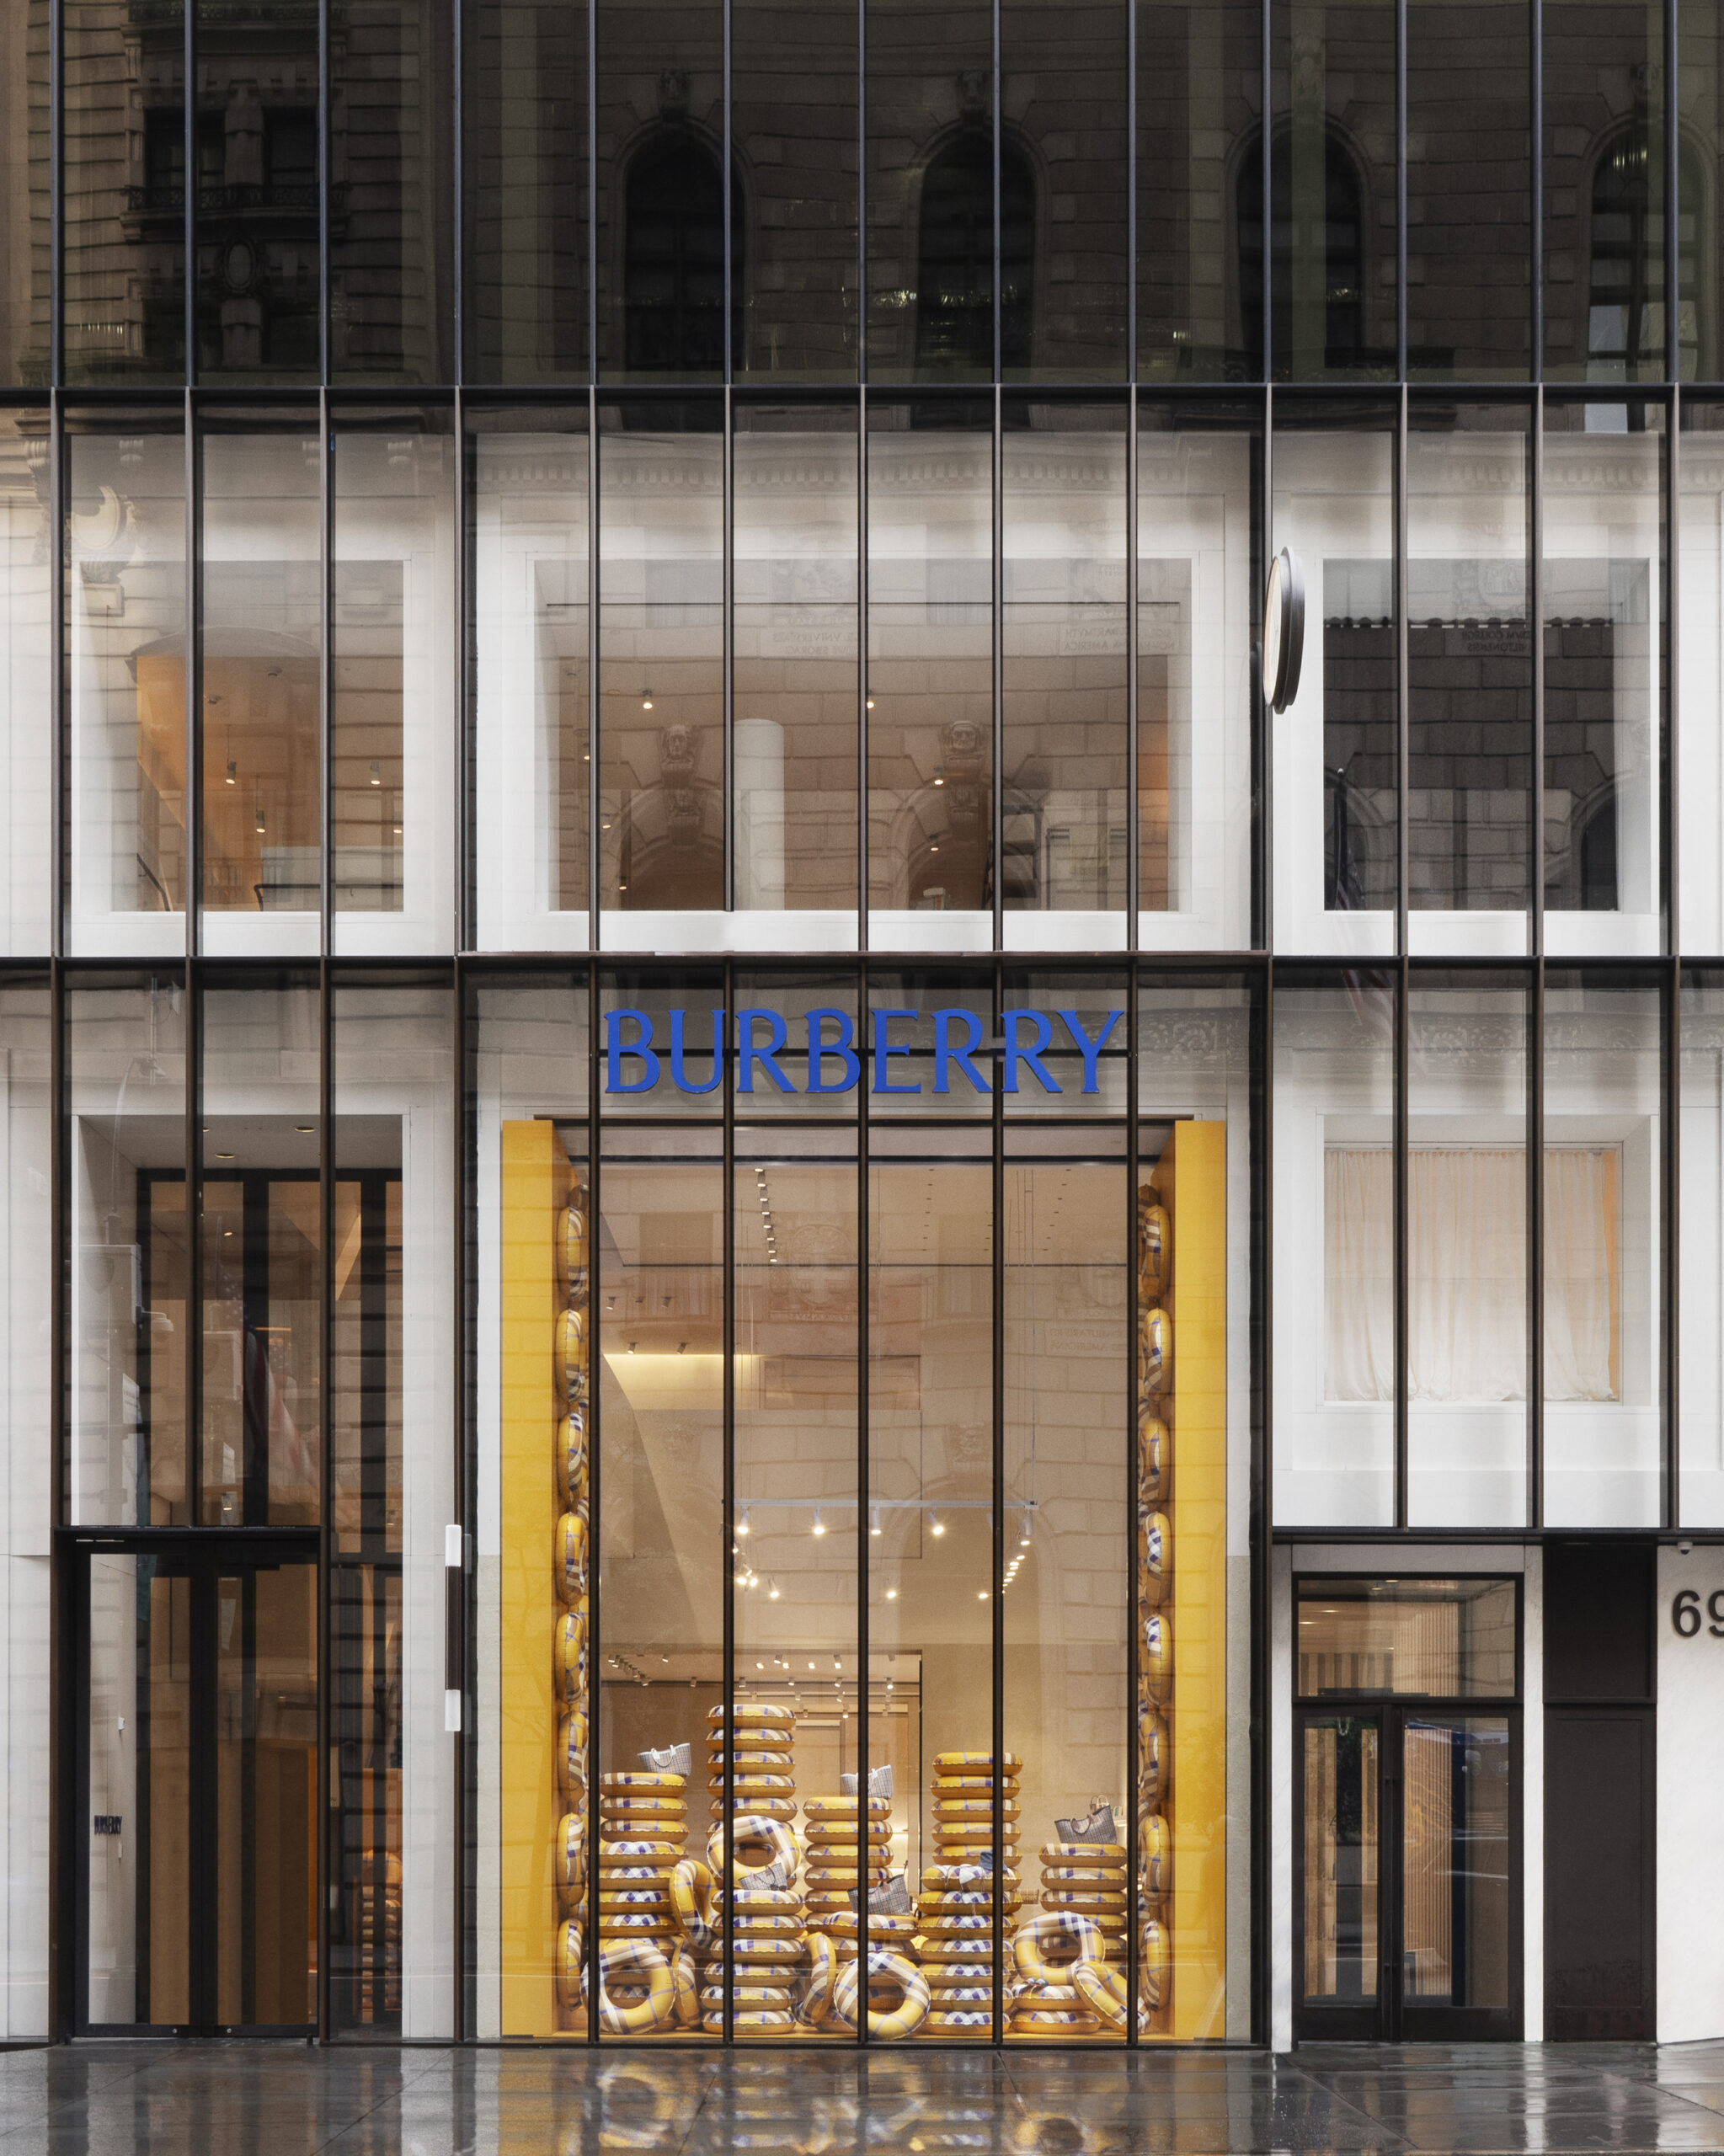 Saks Fifth Avenue Unveils New Beauty Floor In New York Flagship